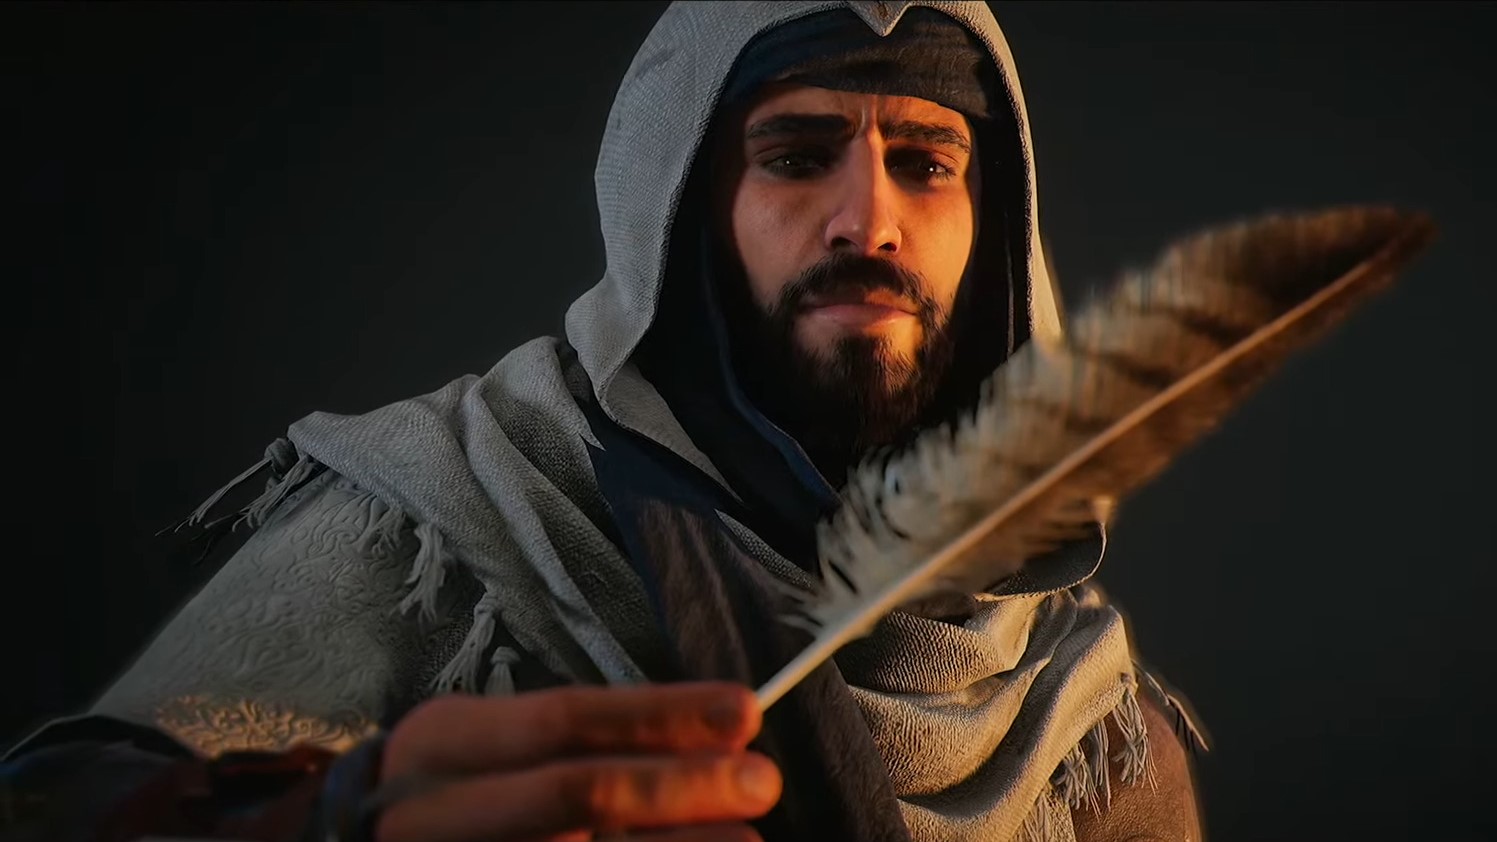 Assassin's Creed Valhalla: Story Trailer 